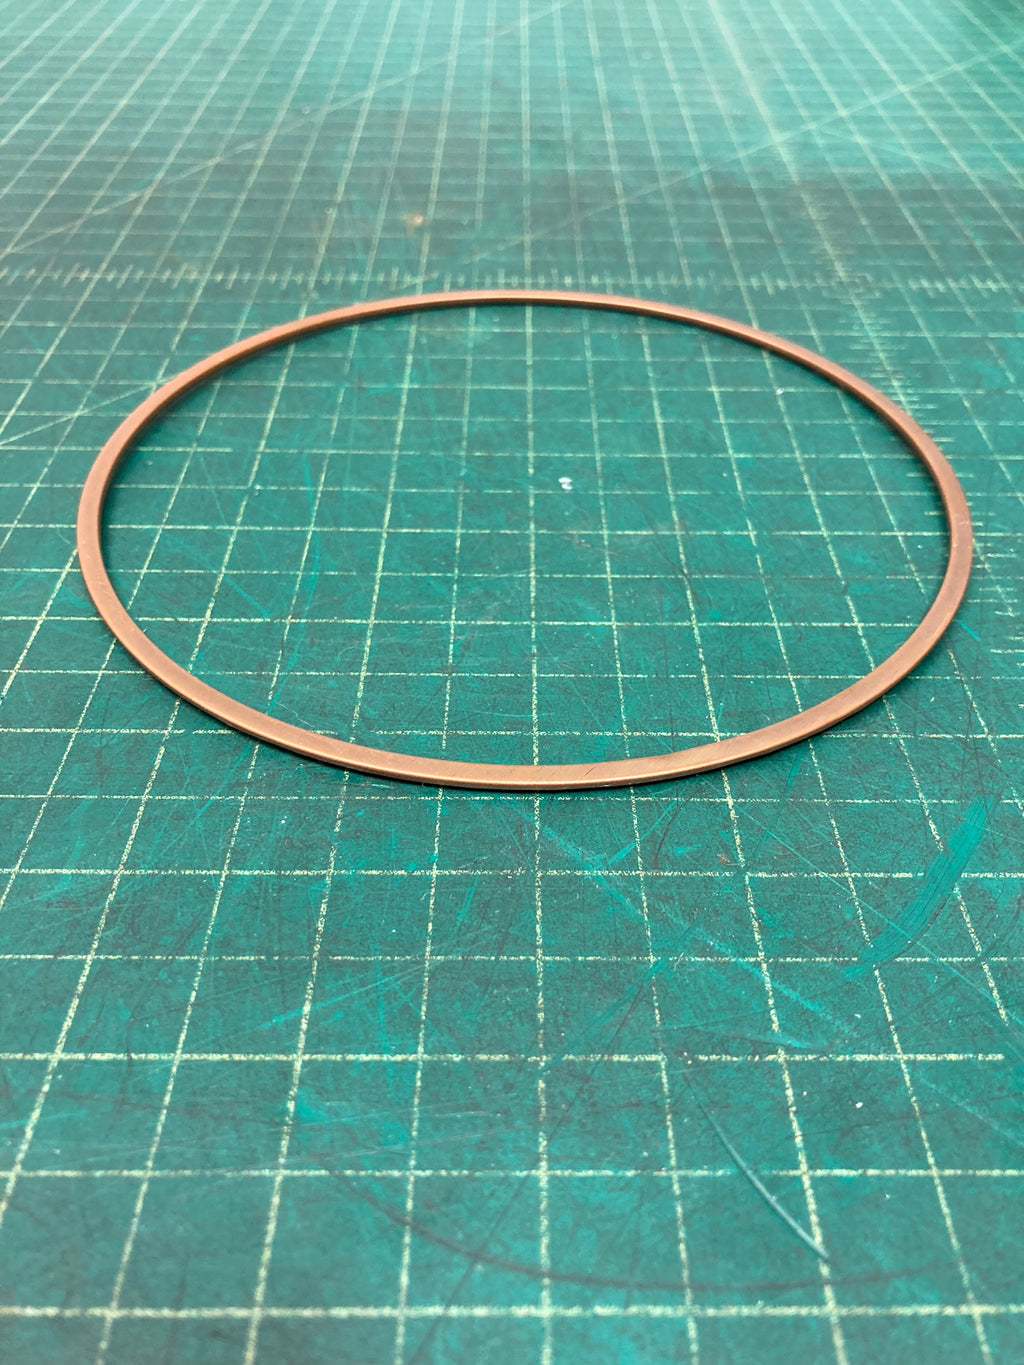 Gasket Cover Ring, 154 LP, ASB Copper, 6 1/16" x 5 3/4"